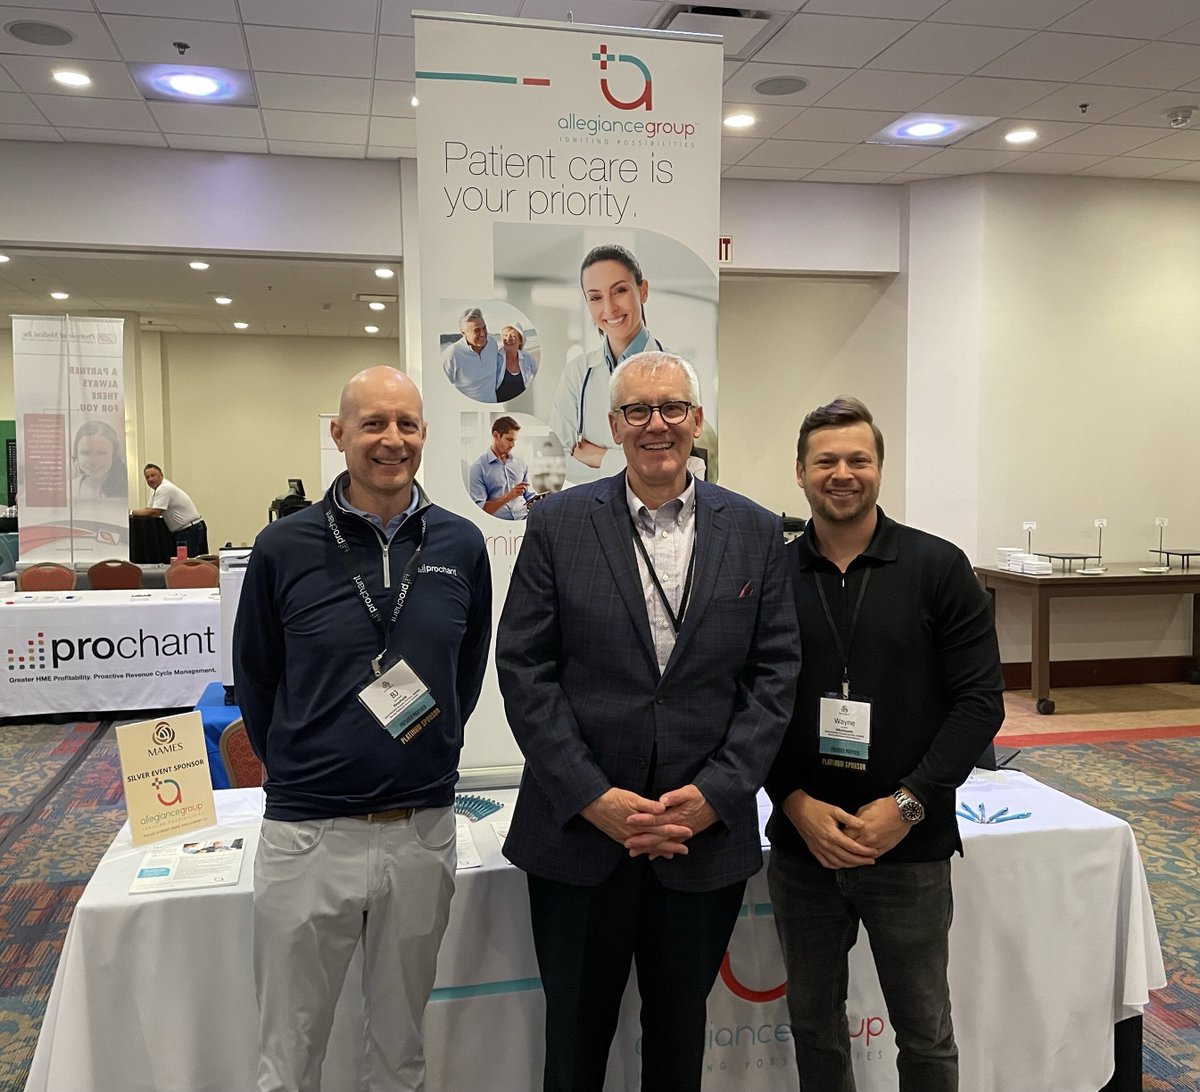 Last day at the @MAMESHME Spring Conference. Always great to see our friends! Thanks to Wayne Hudson at NikoHealth and Bruce Gehring at Allegiance Group for the engaging discussions. 

#AI #RevenueCycleManagement #HME